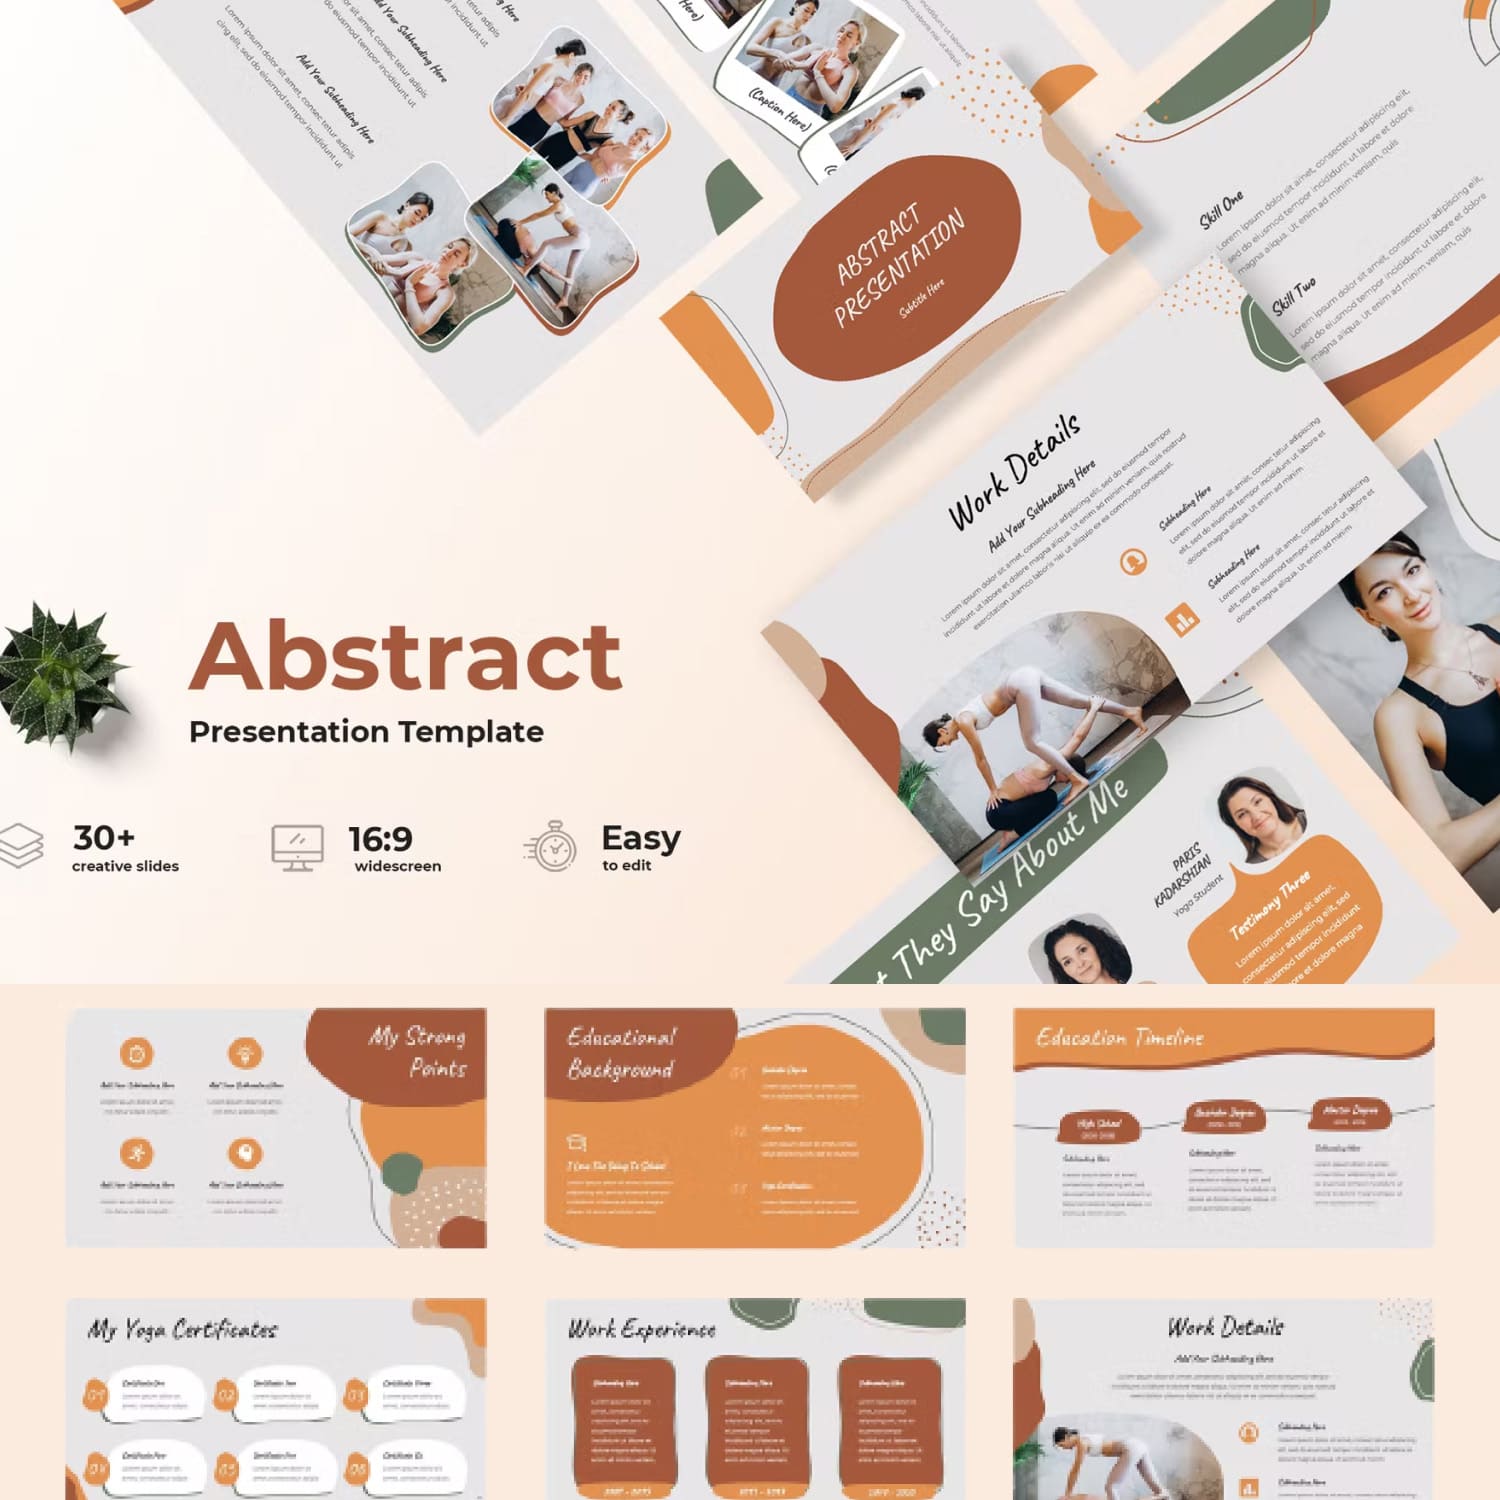 Abstract powerpoint presentation template - main image preview.